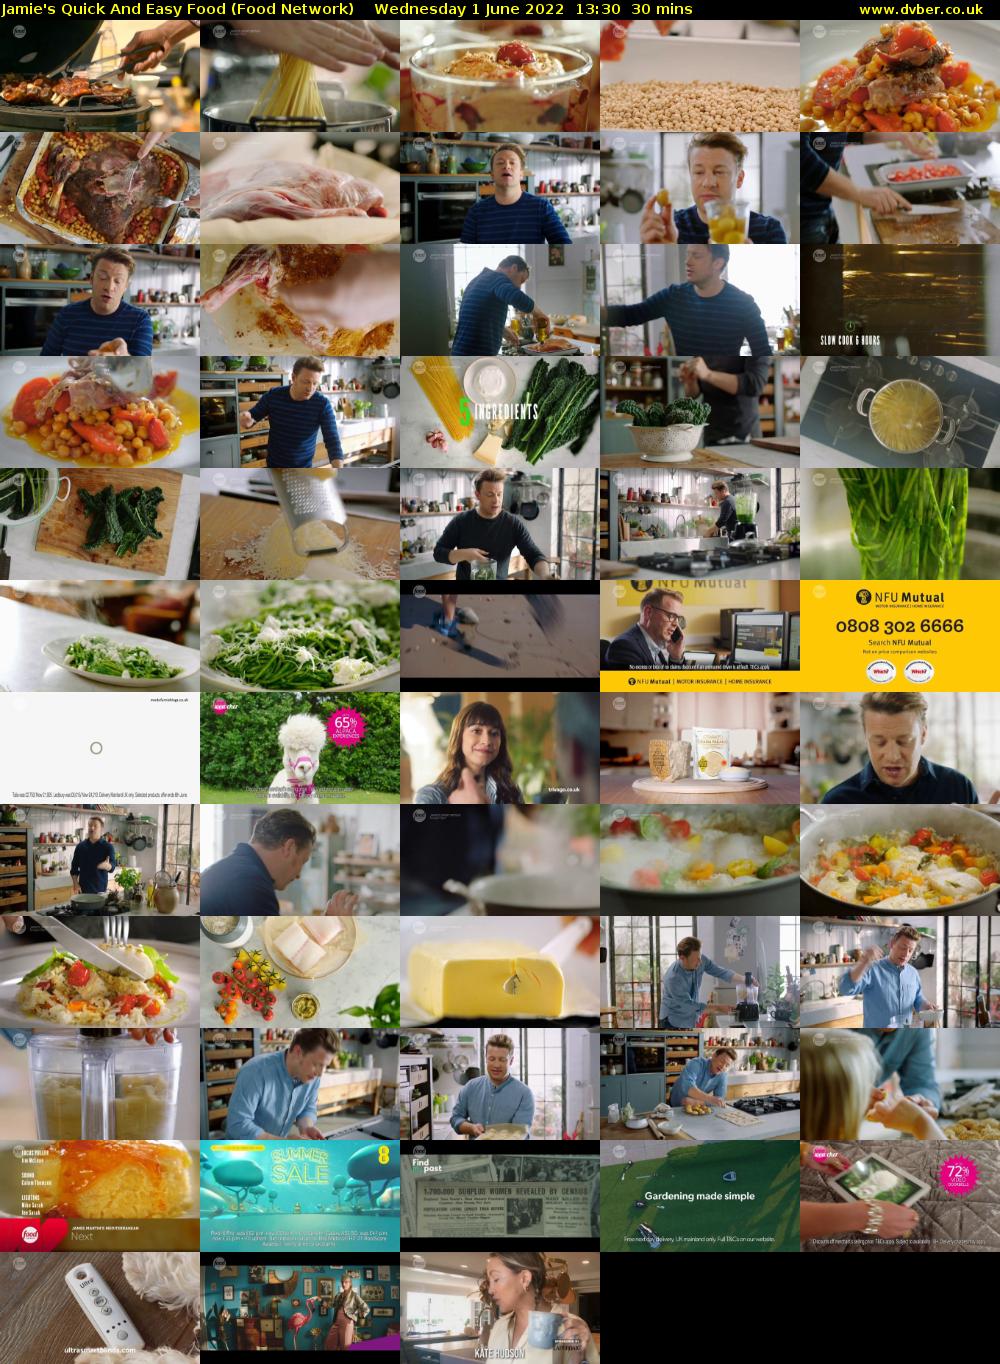 Jamie's Quick And Easy Food (Food Network) Wednesday 1 June 2022 13:30 - 14:00